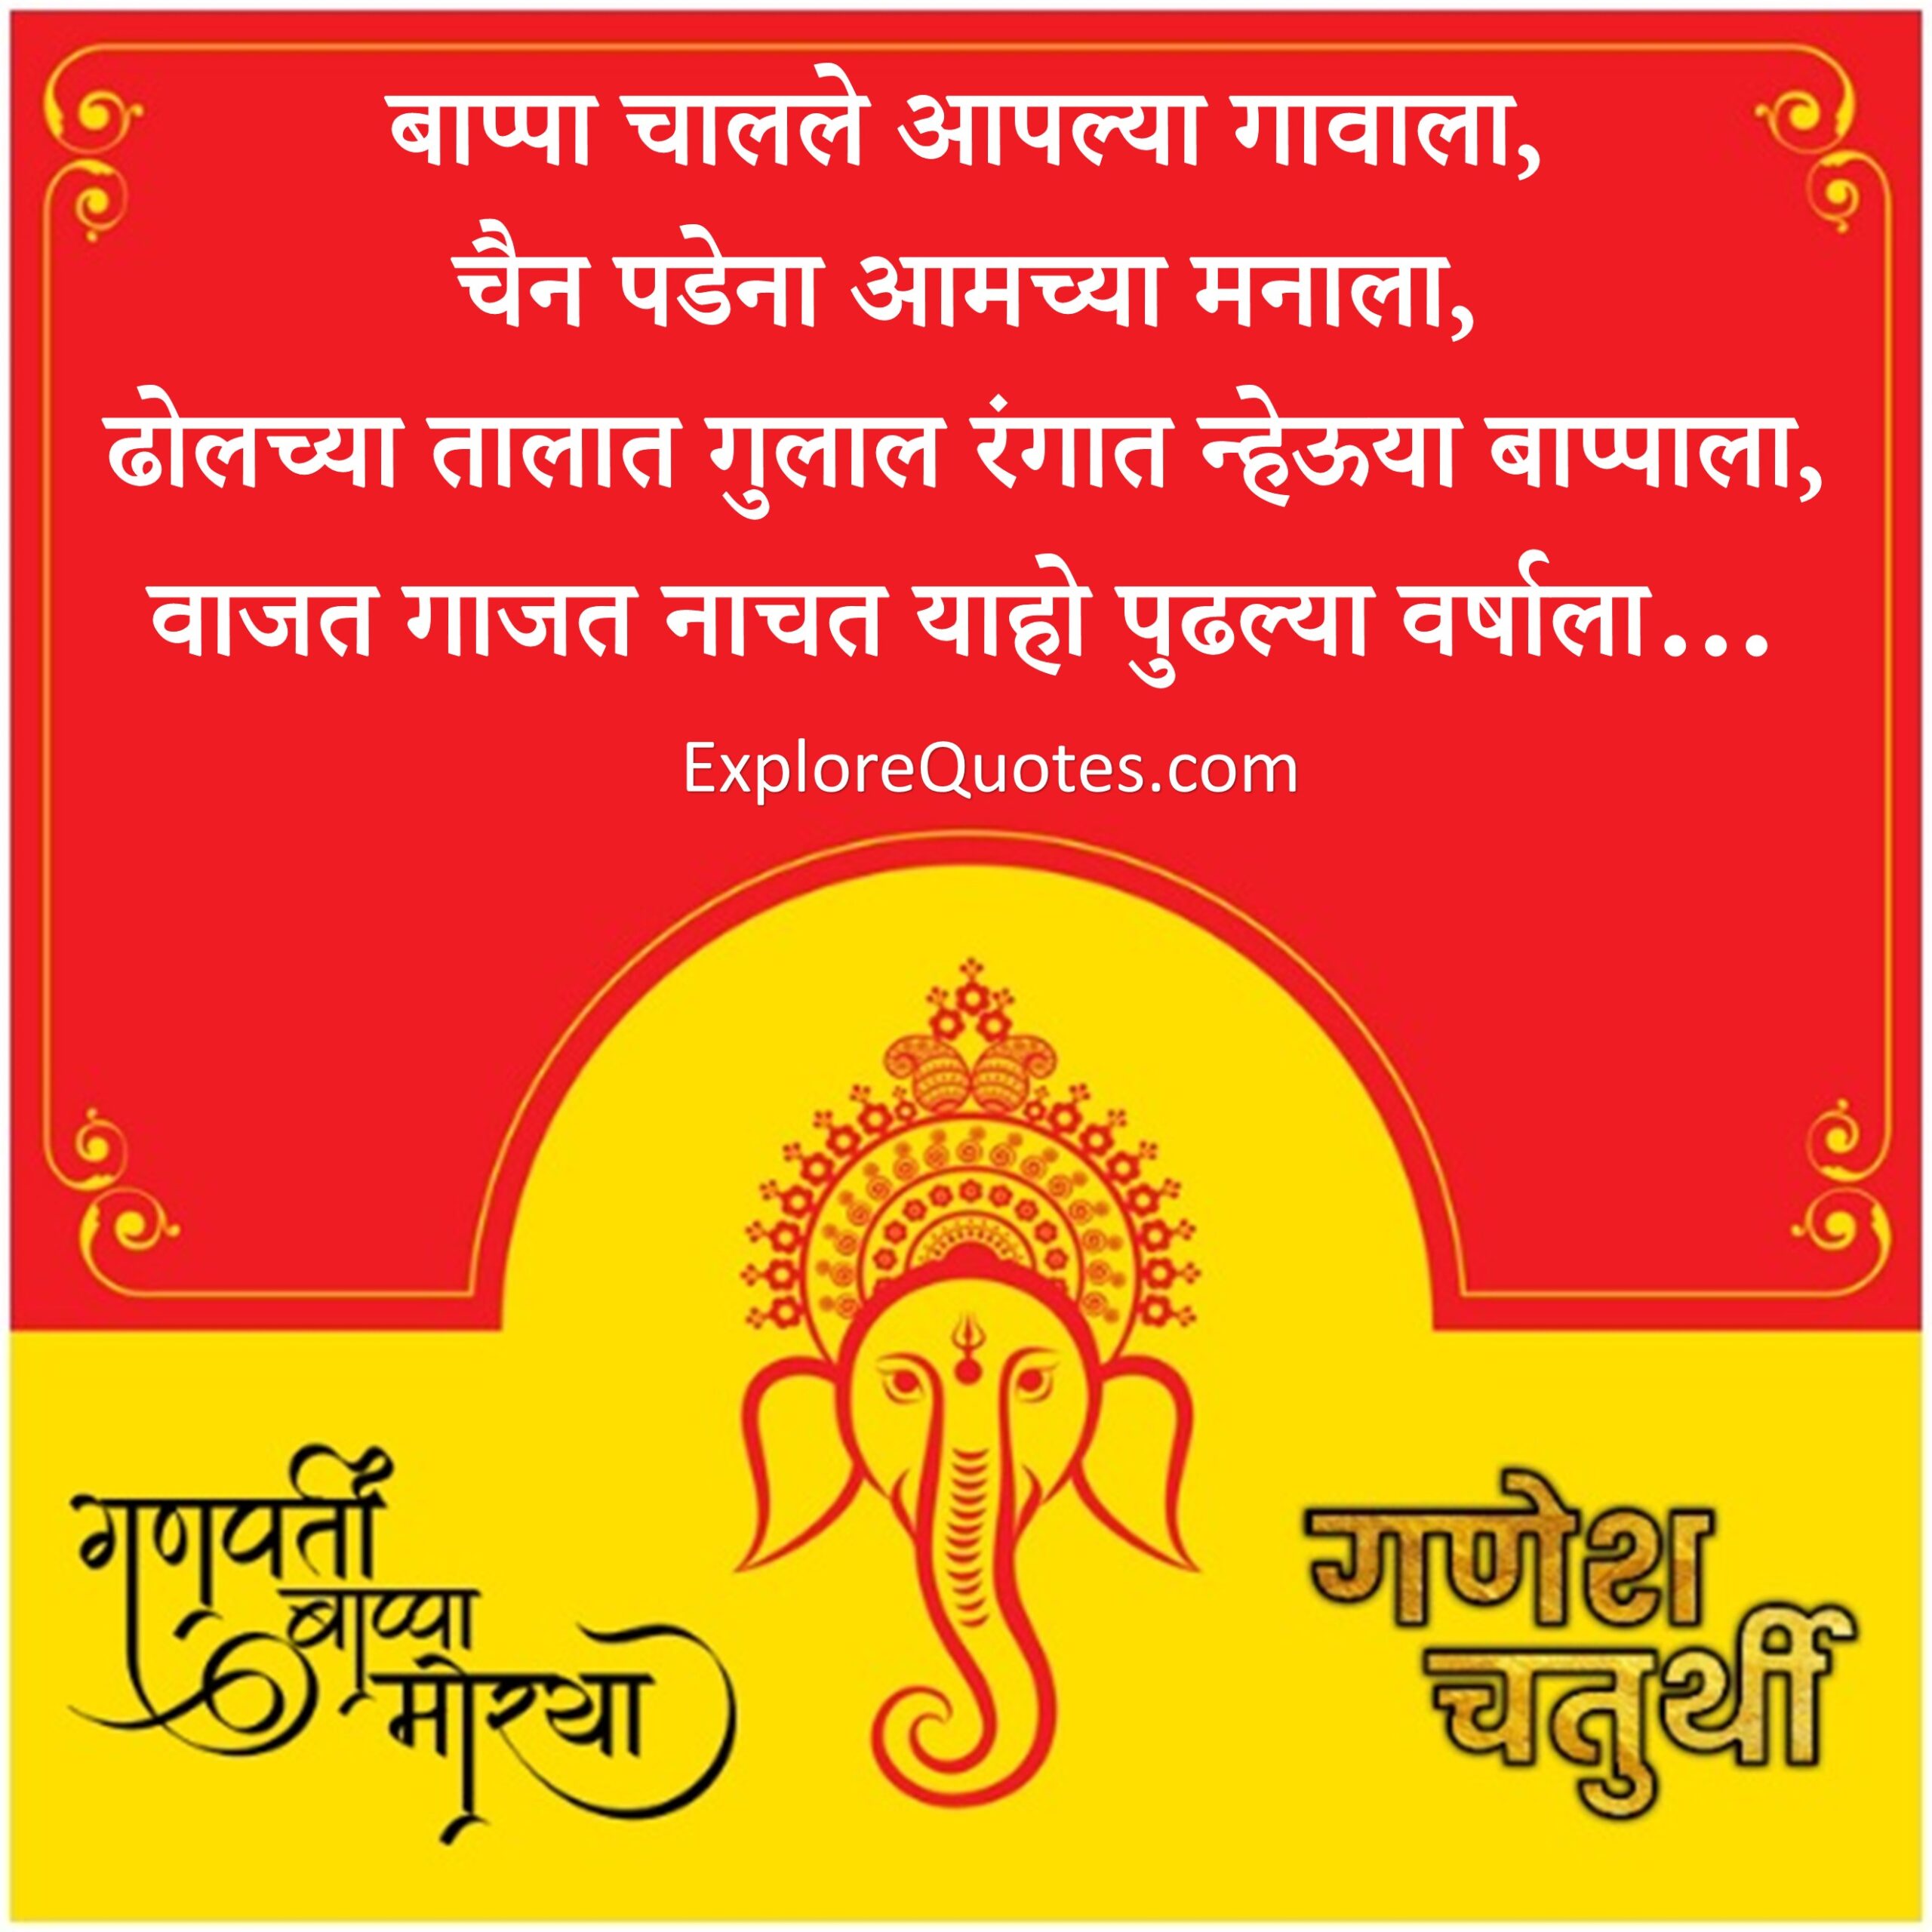 Ganesh Chaturthi Sms Quotes In Marathi Explore Quotes Find best happy ganesh chaturthi wishes, ganpati quotes, caption, sms, in english , hindi and marathi for facebook, instagram with. ganesh chaturthi sms quotes in marathi